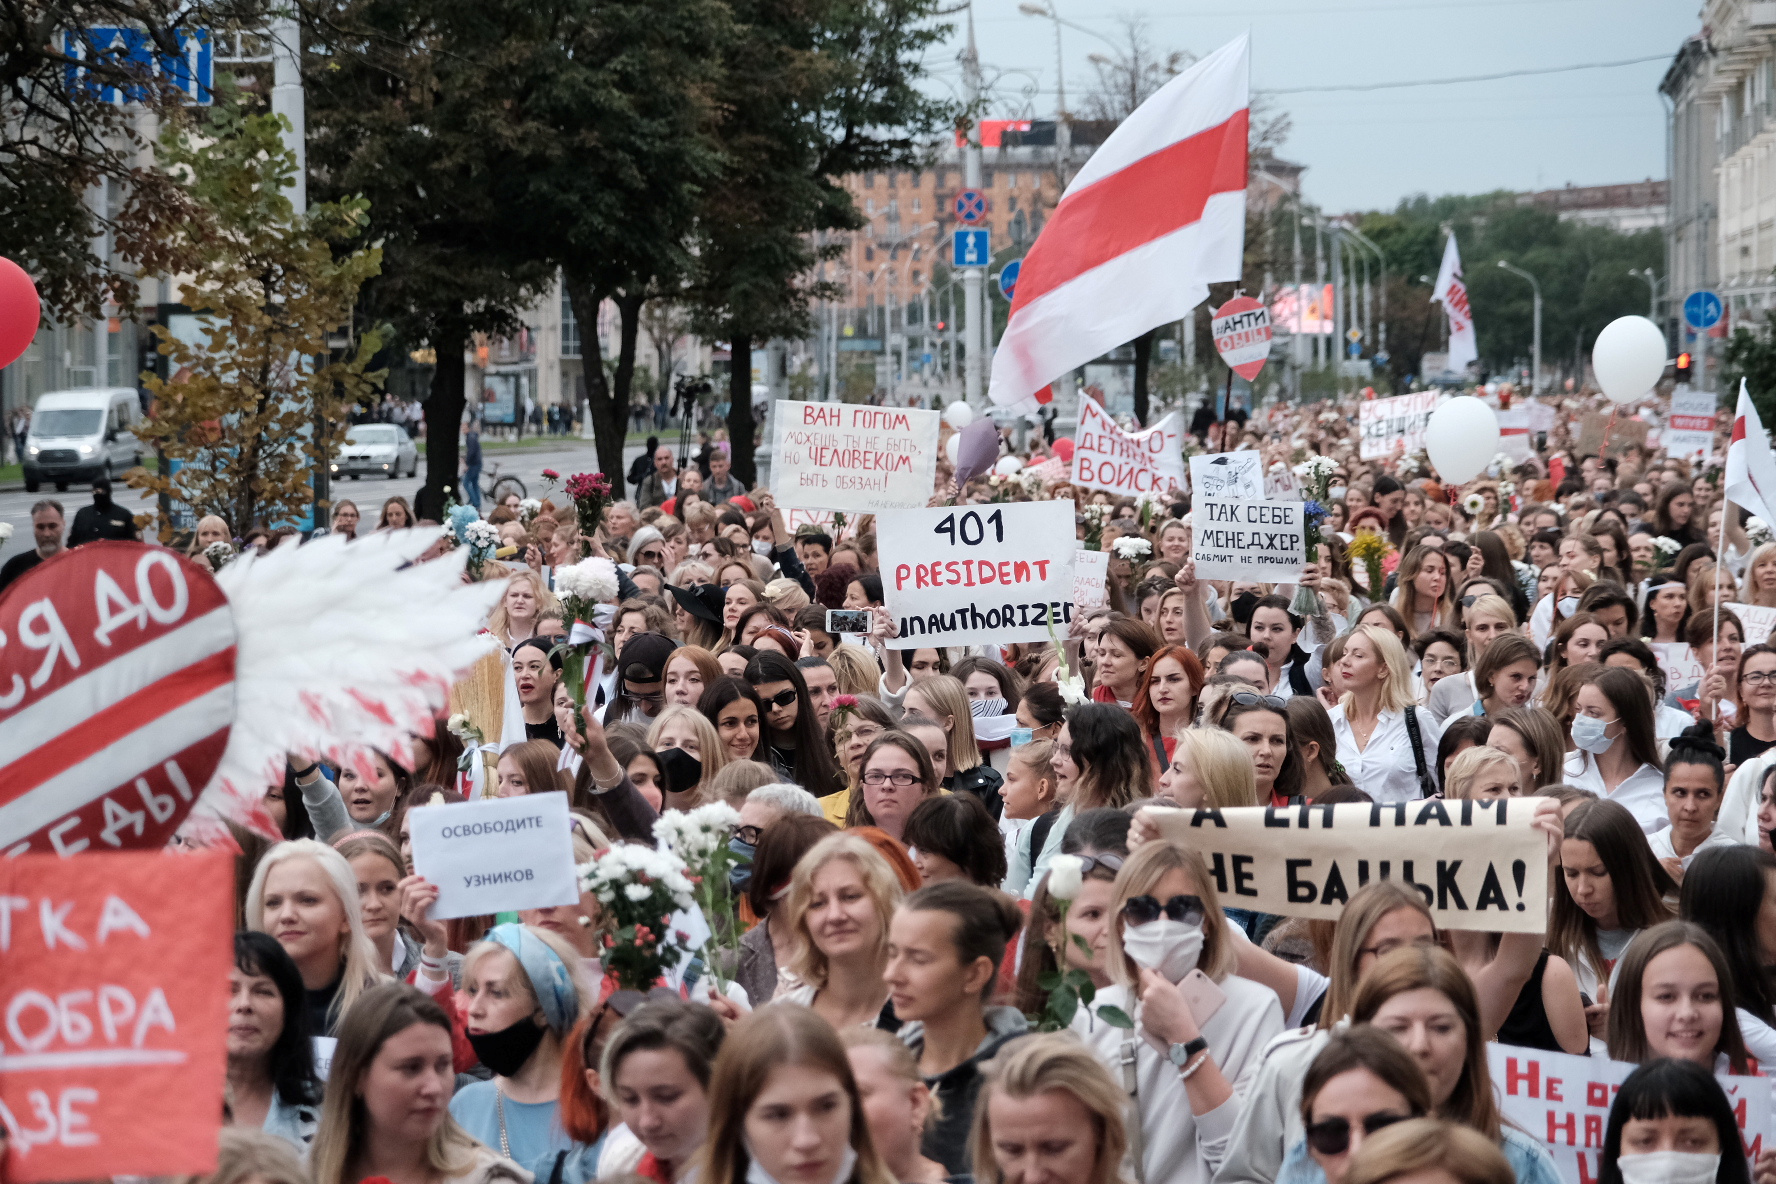 PHOTO: Women hold signs as they walk during a demonstration against police brutality following recent protests to reject the presidential election results in Minsk, Belarus, Aug. 29, 2020.